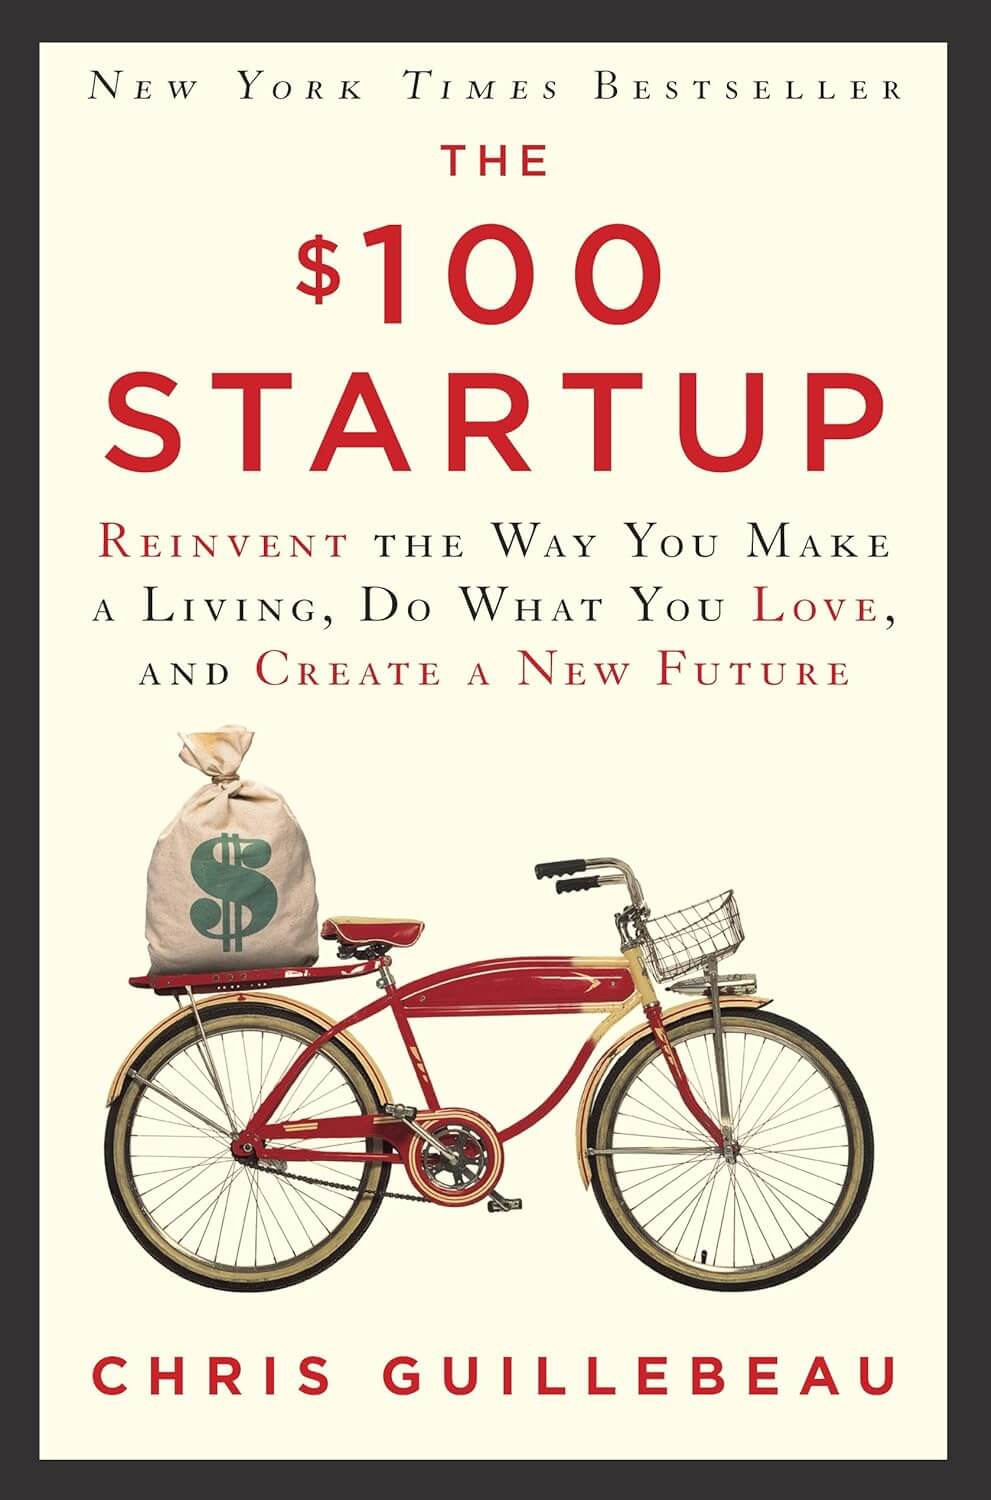 4. Chris Guillebeau - 'The $100 Startup' 💡💰